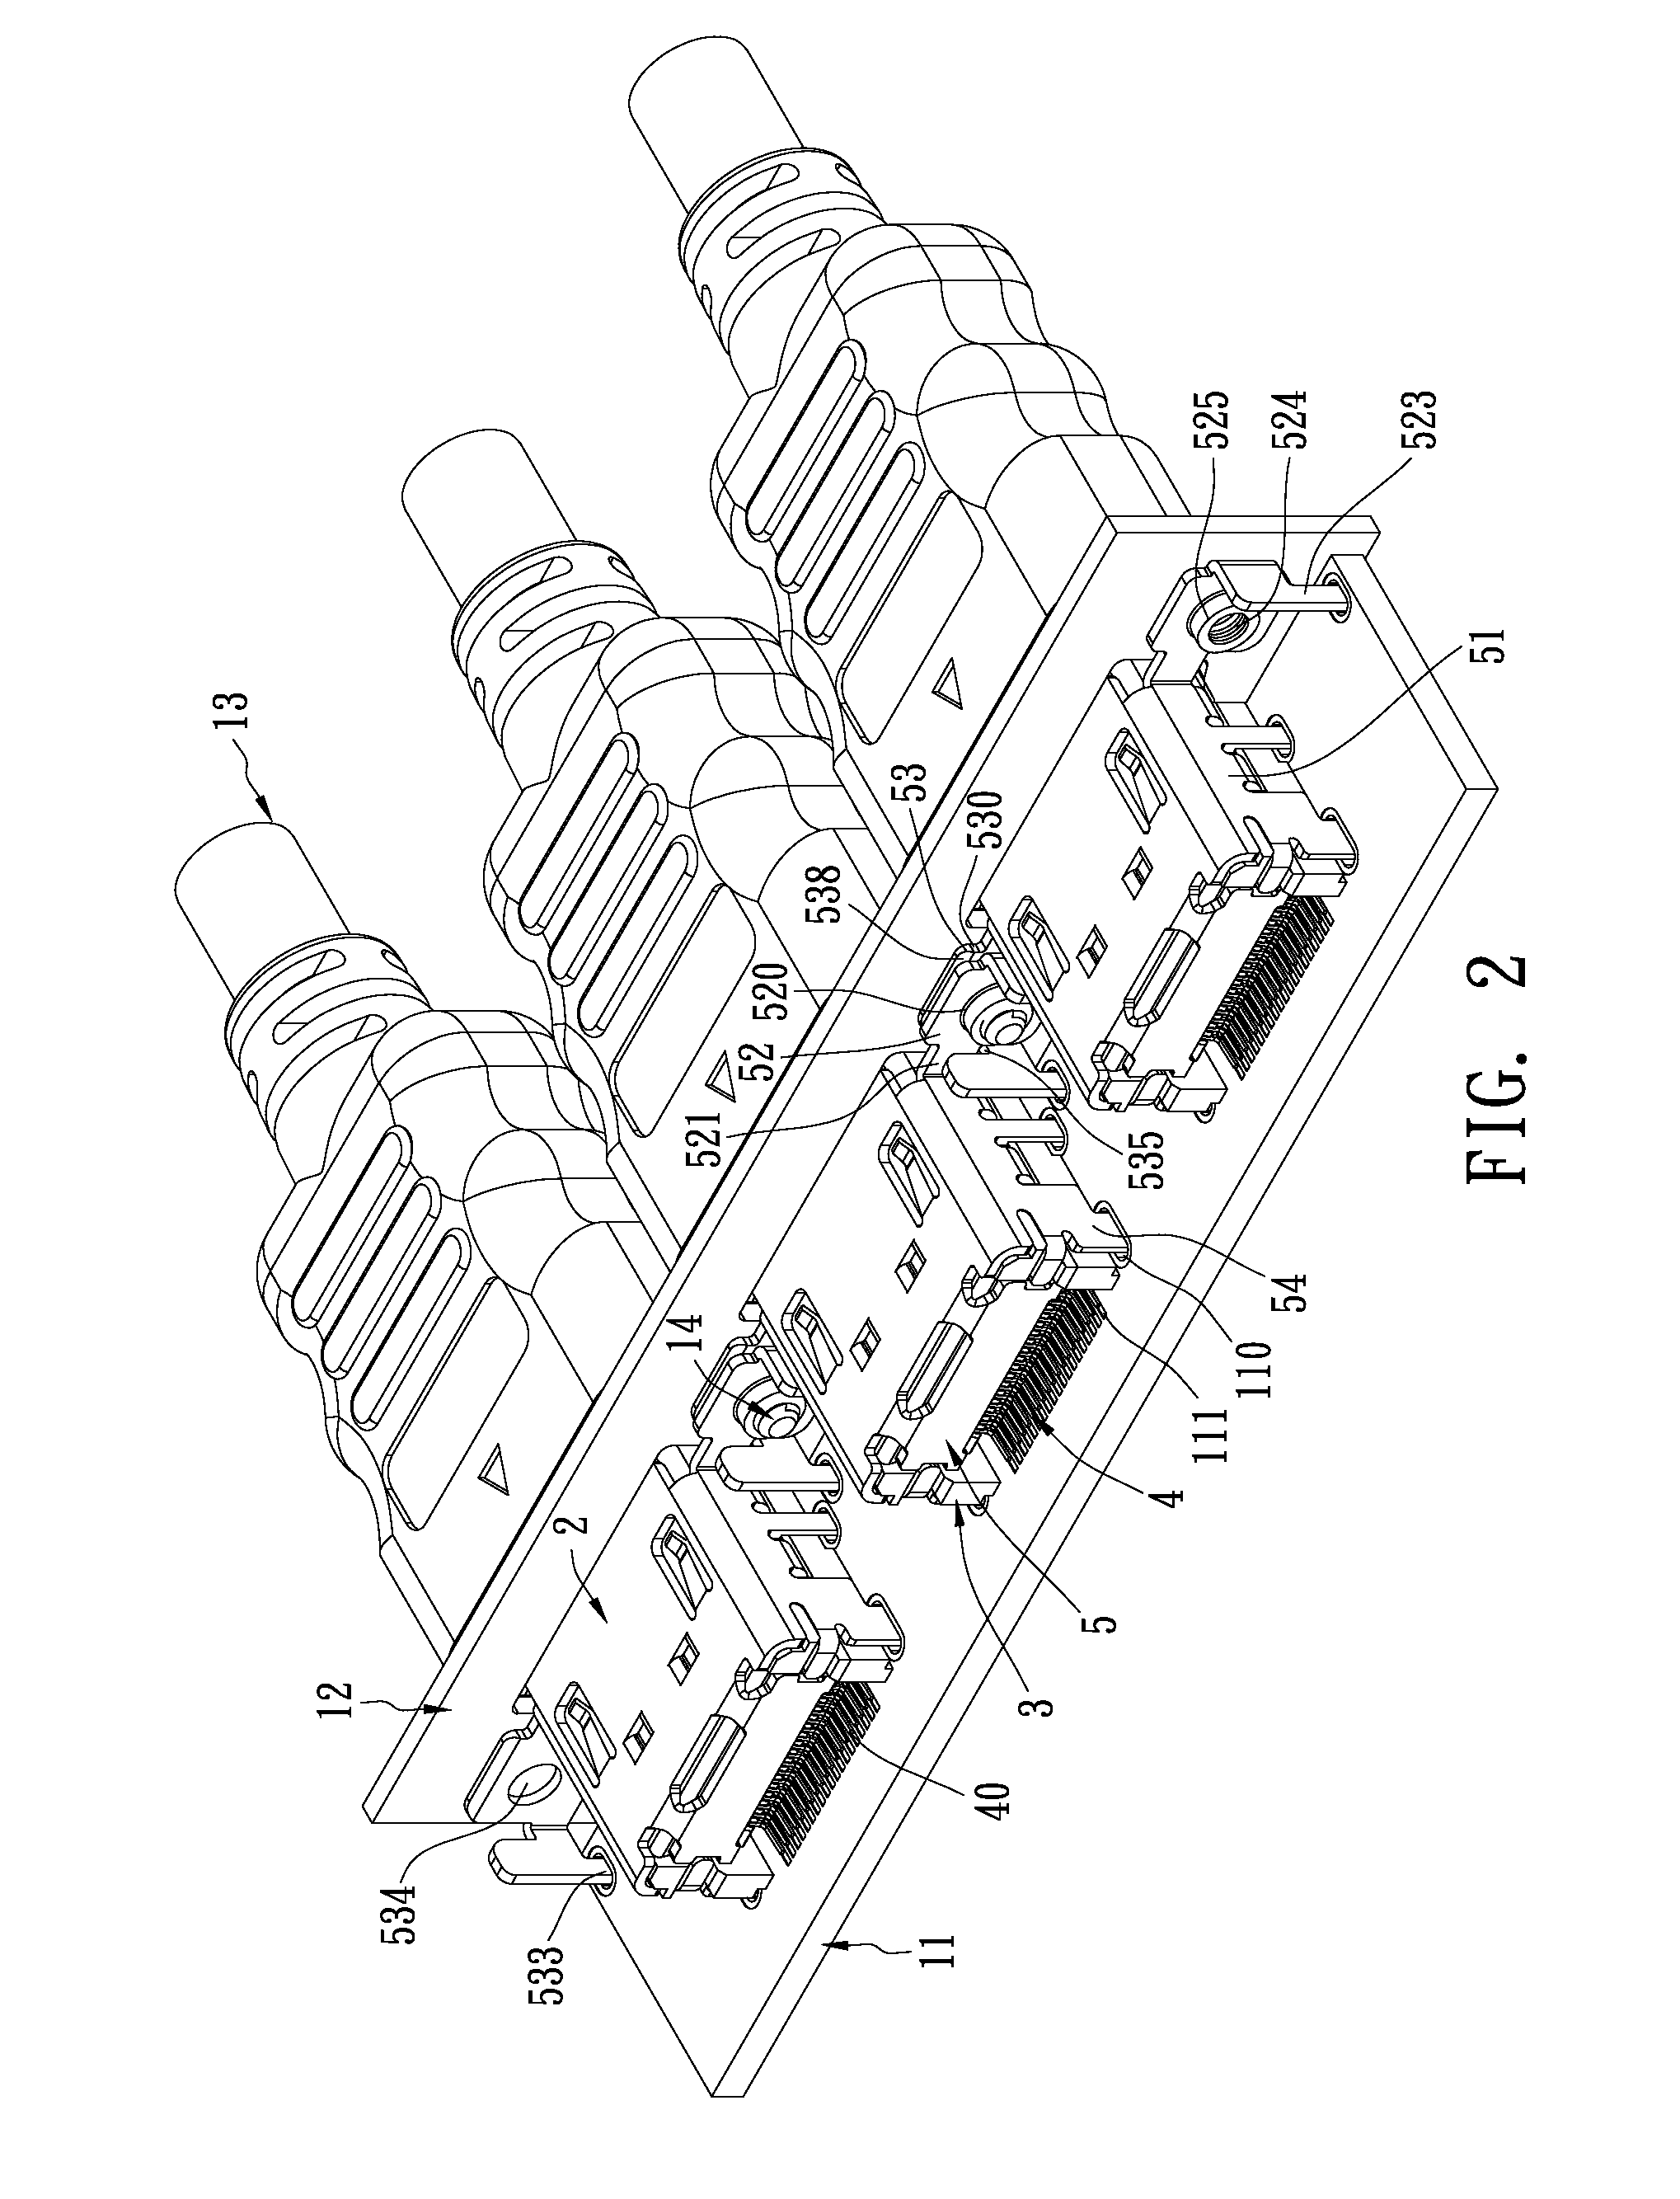 Connector with side flange